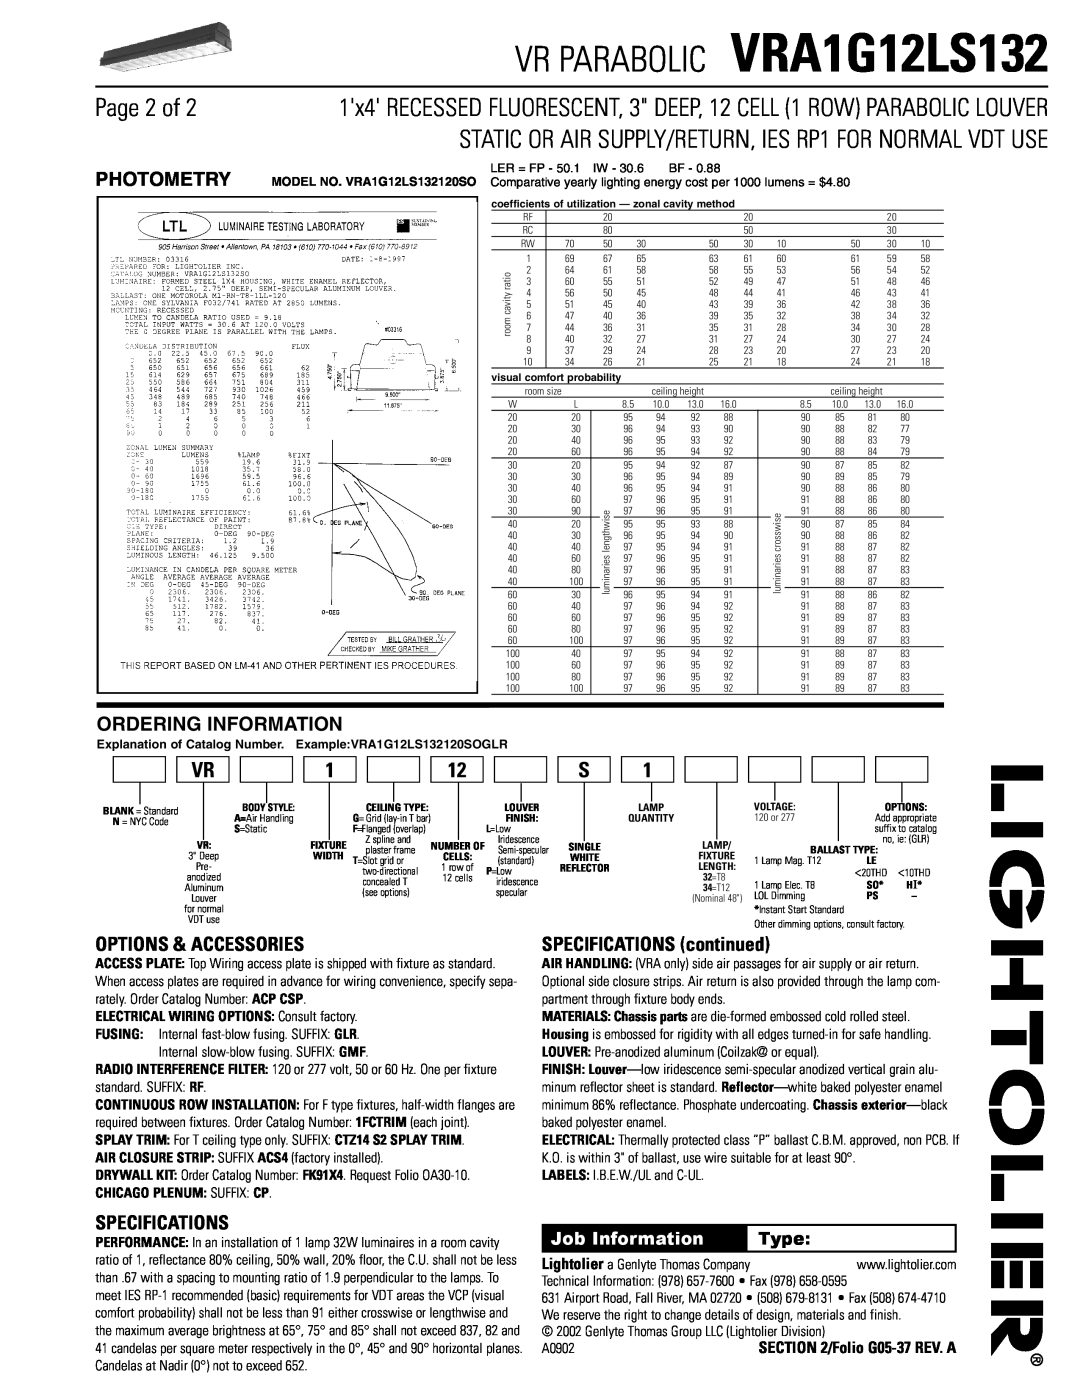 Lightolier VRA1G12LS132 Page 2 of, Options & Accessories, SPECIFICATIONS continued, Specifications, Photometry, Type 